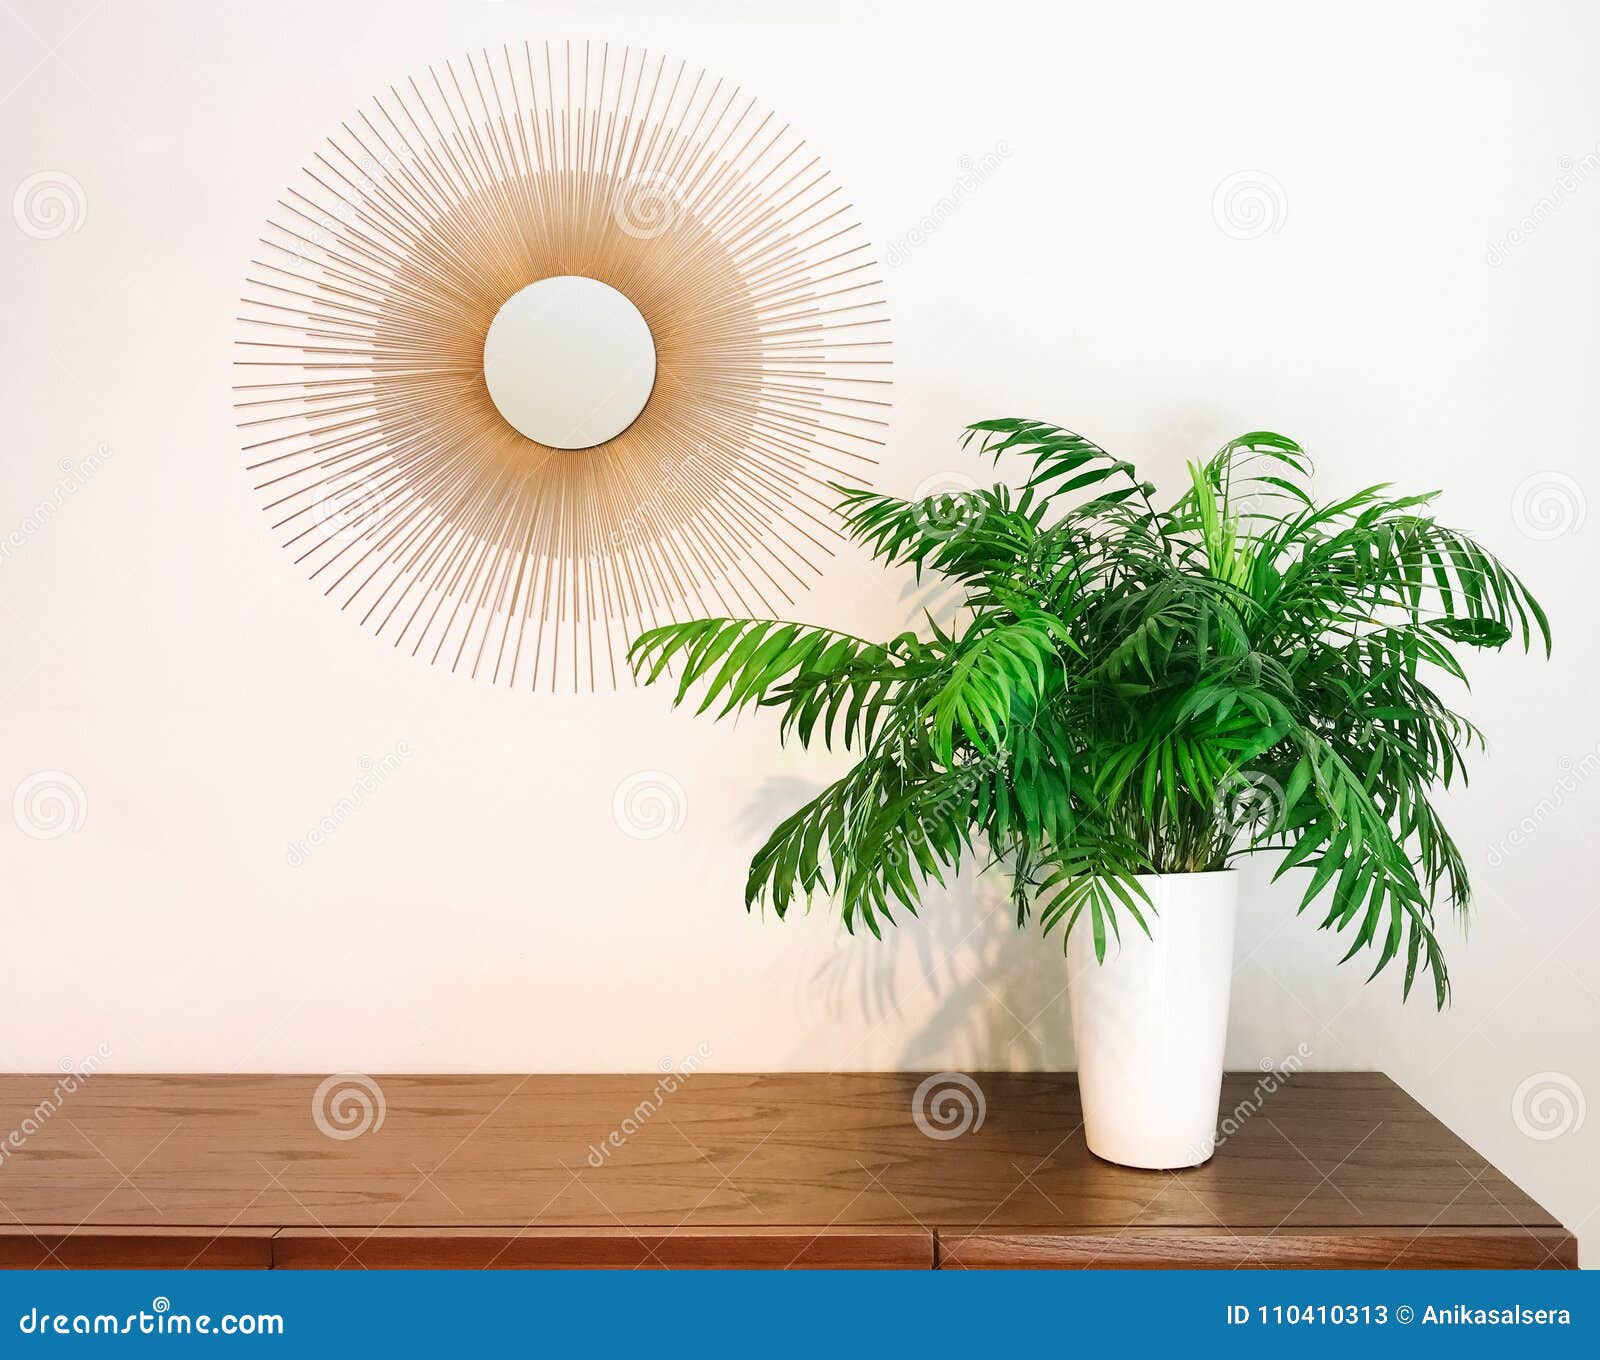 decorative round mirror and parlor palm plant on a dresser